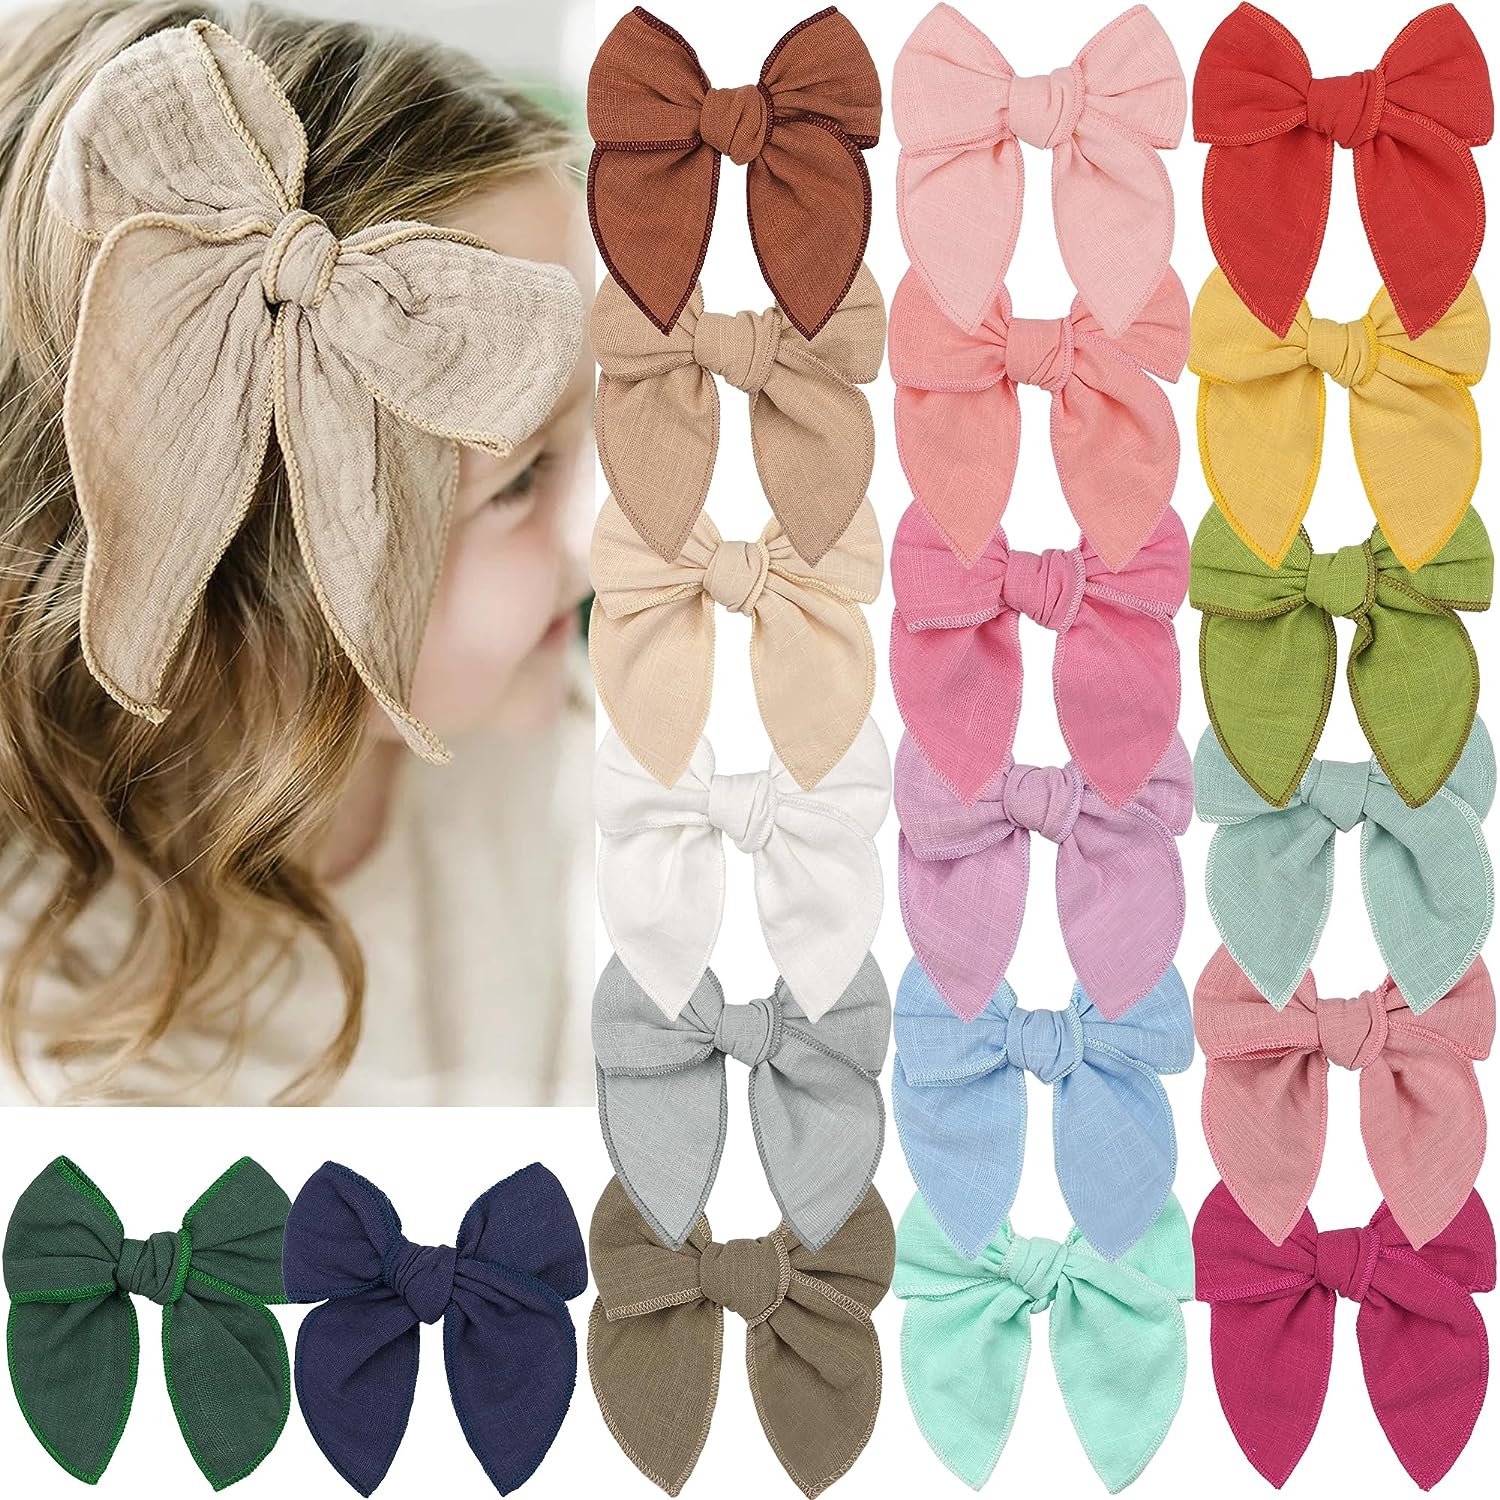 20 Colors Bows for Girls,5 Inch Cotton Linen Fabric Hair Bows Alligator Clips Neutral Handmade Hair Accessories for Baby Girls Toddlers Kids and Children